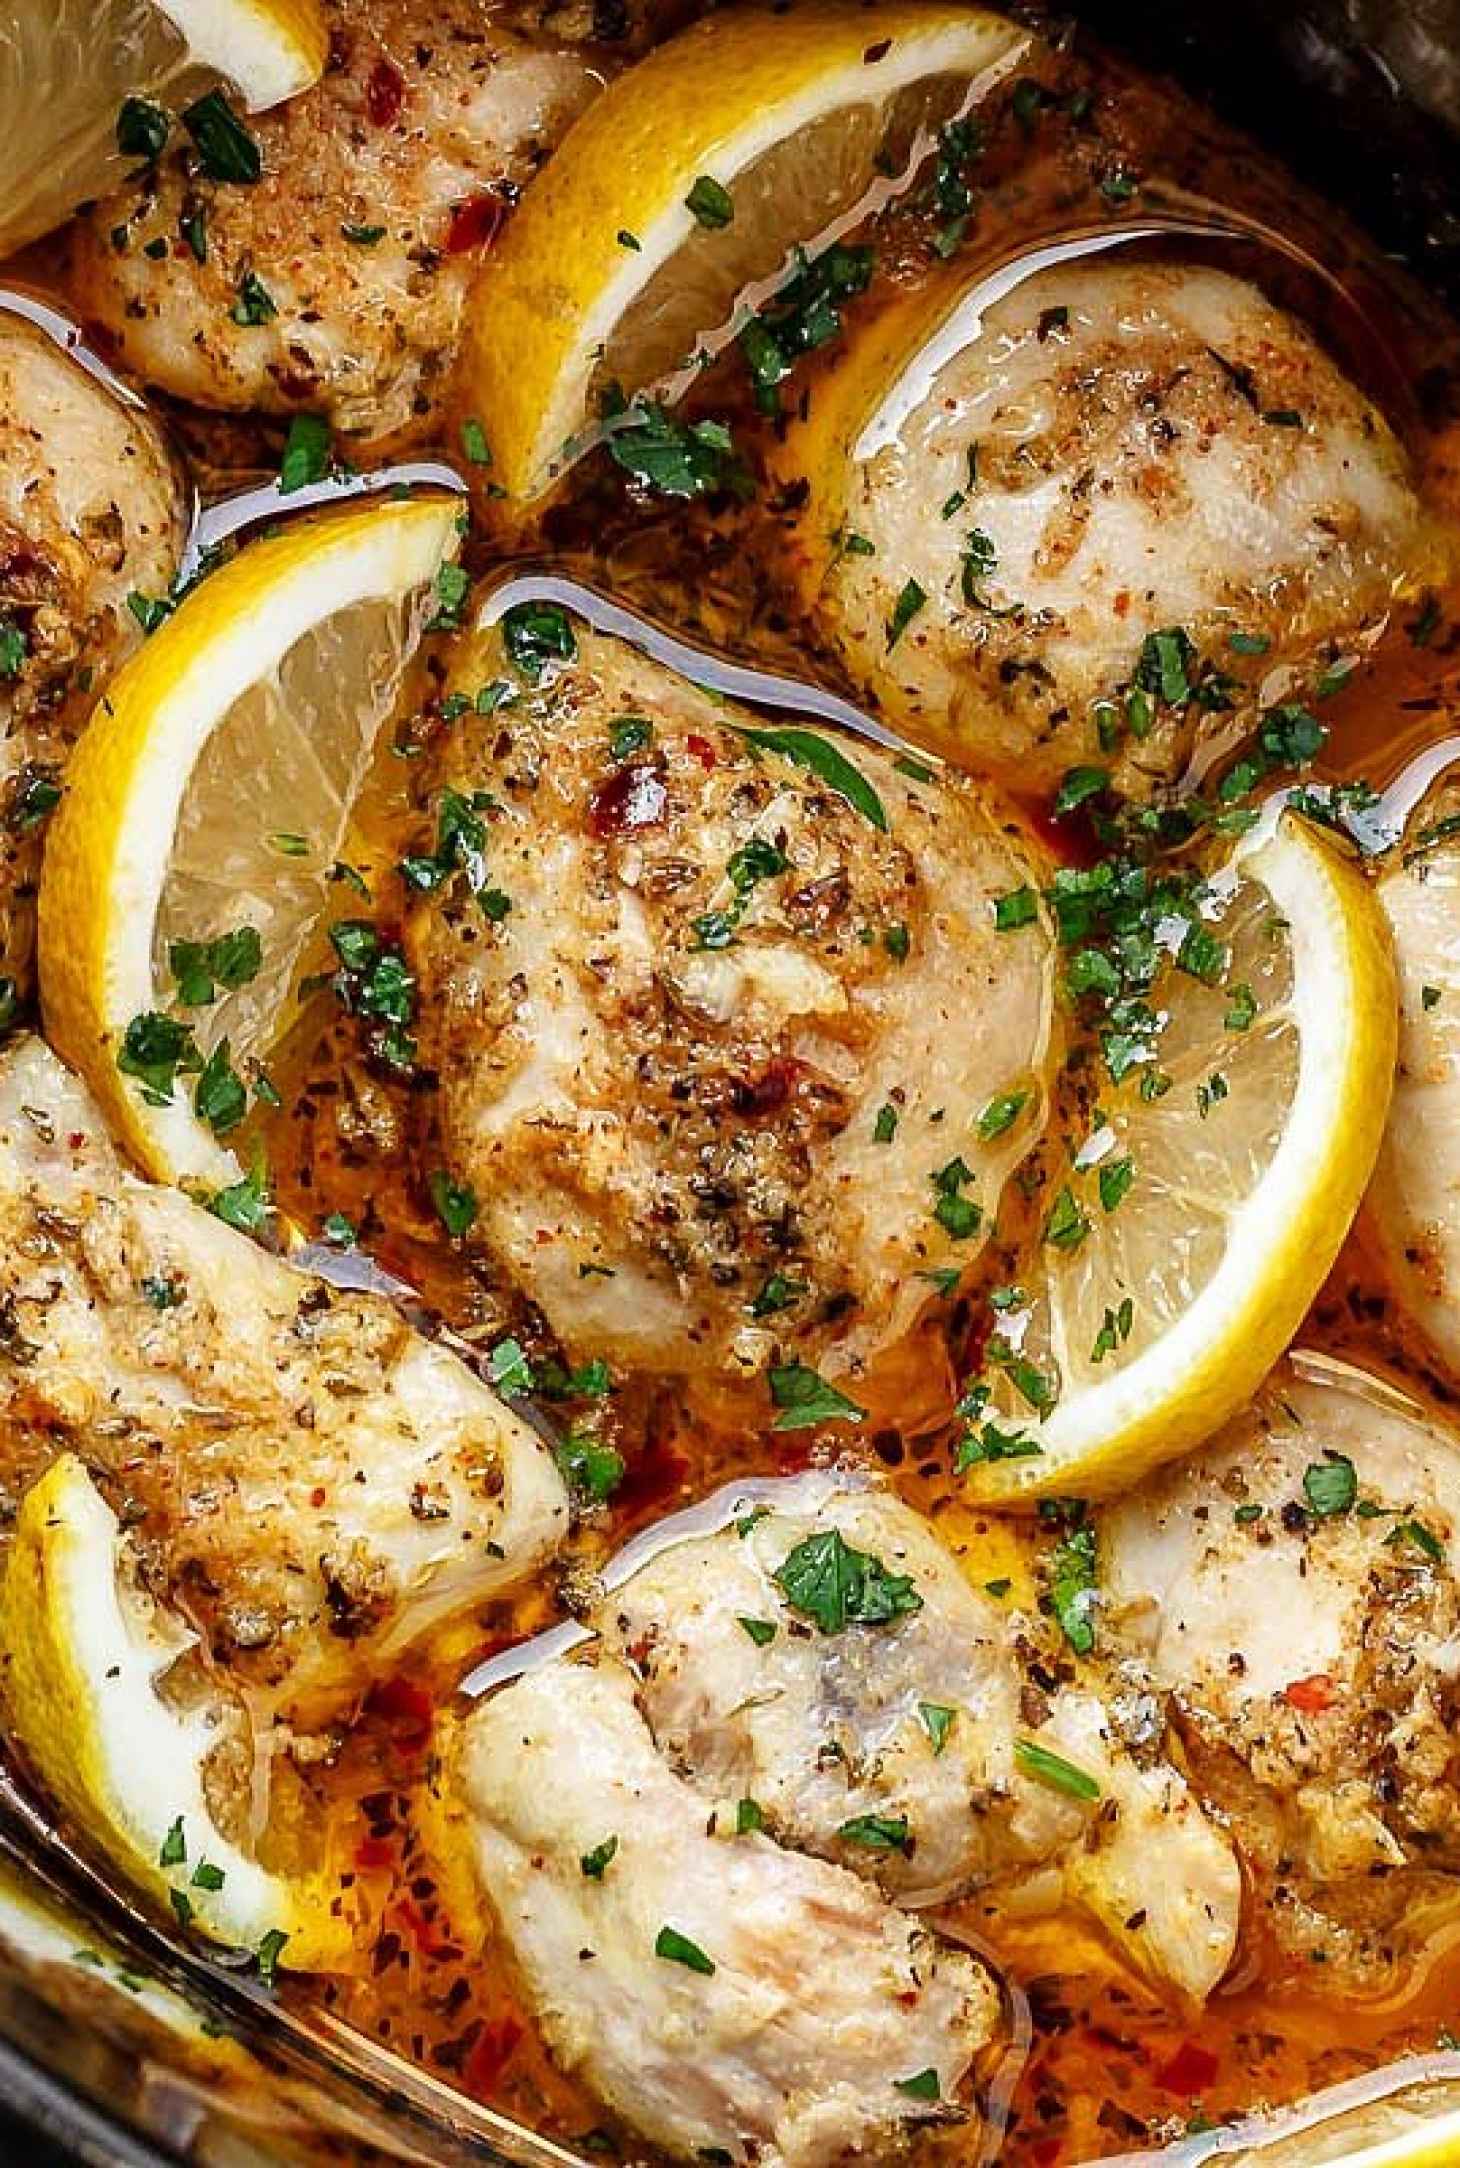 Chicken Meals For Easter - 61 Easter Dinner Ideas That Feed a Crowd